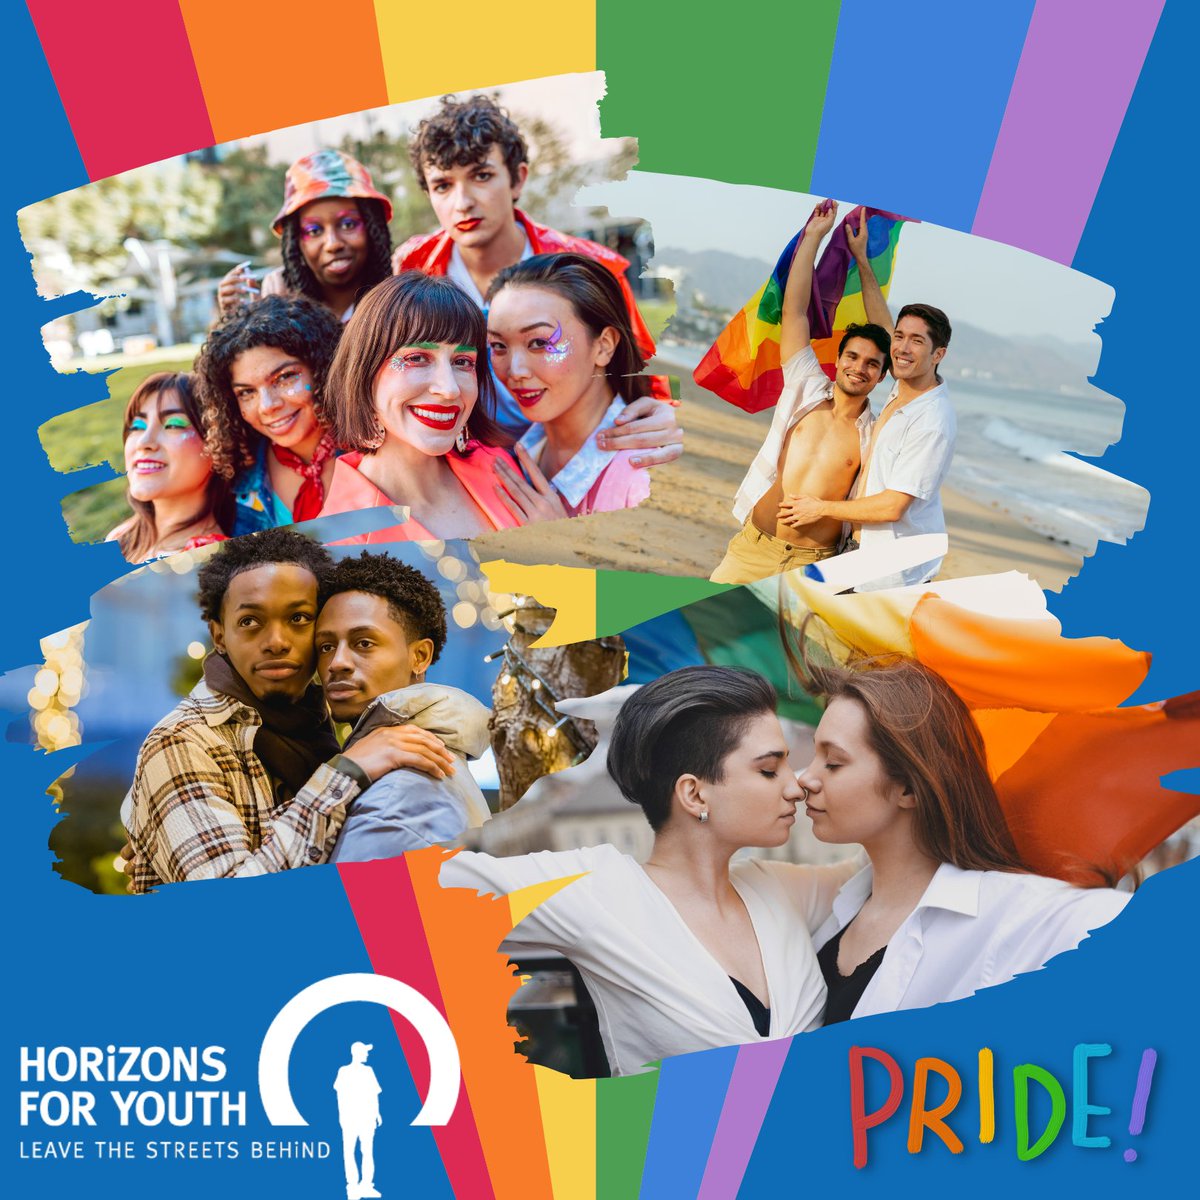 At Horizons for Youth, we take steps to ensure that any LGBTQ2S+ youths coming to us are given the upmost respect and dignity. If you are out there, we are here for you. Help Horizons shelter the homeless youth by donating at: horizonsforyouth.org/donate #pridemonth #lgbtqpride